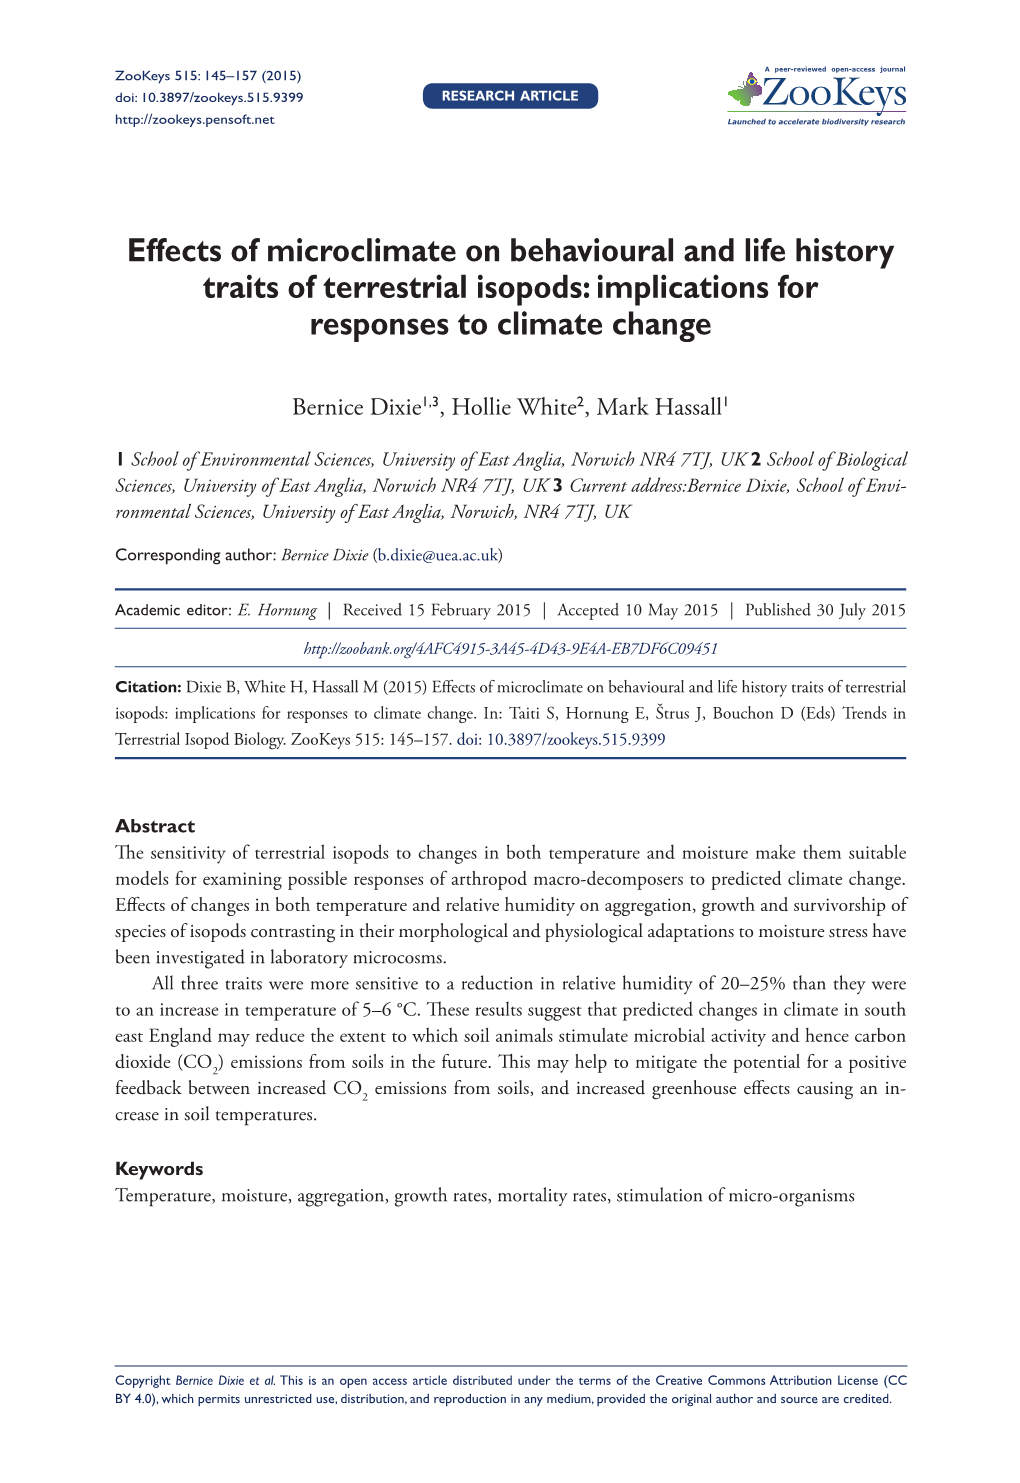 Effects of Microclimate on Behavioural and Life History Traits of Terrestrial Isopods: Implications for Responses to Climate Change